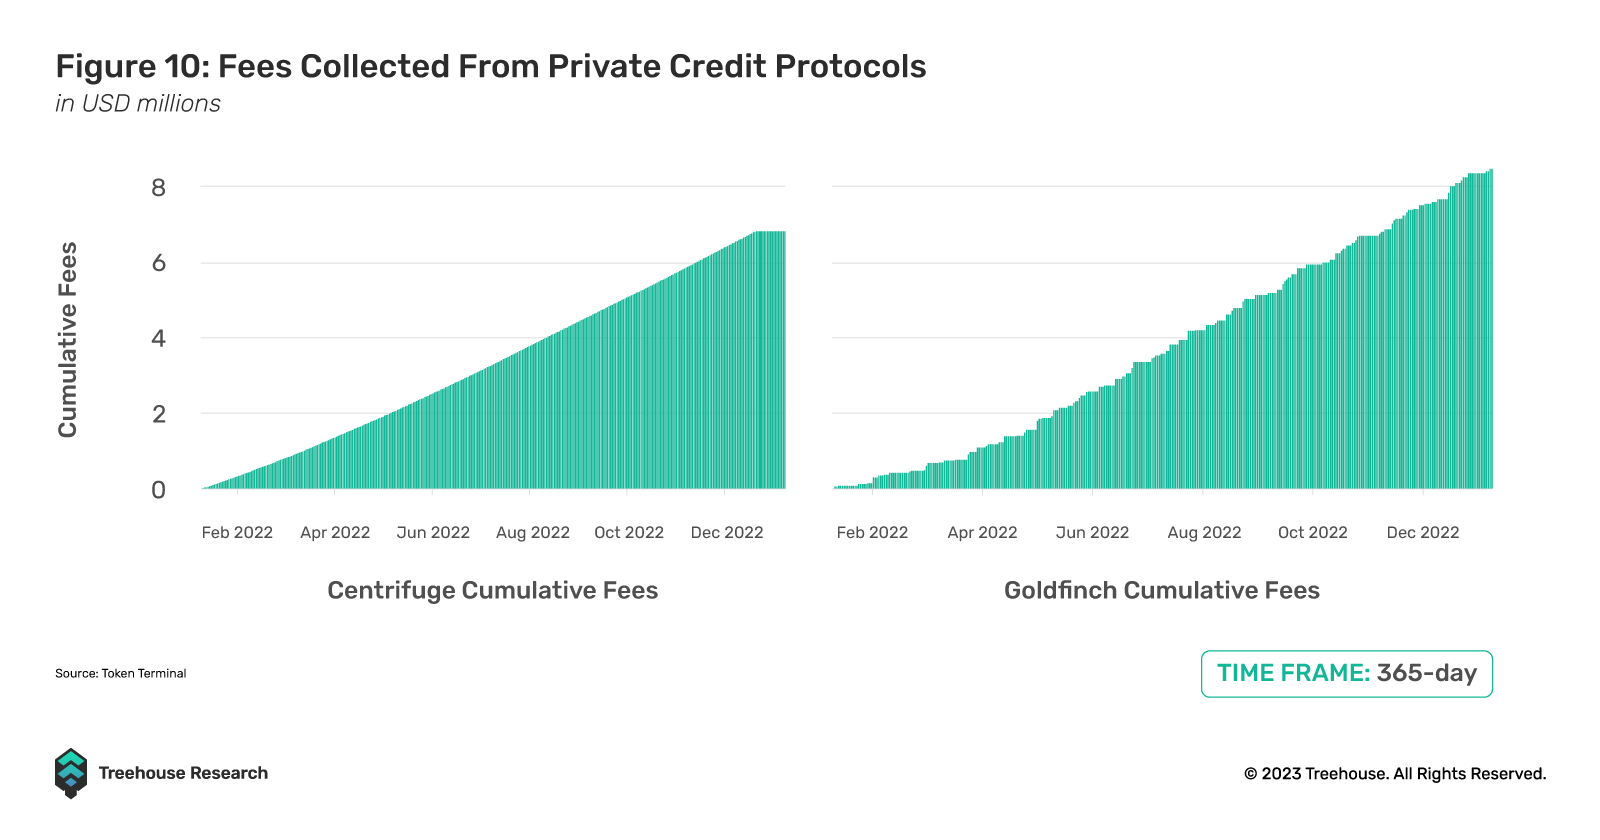 fees collected from private credit protocols